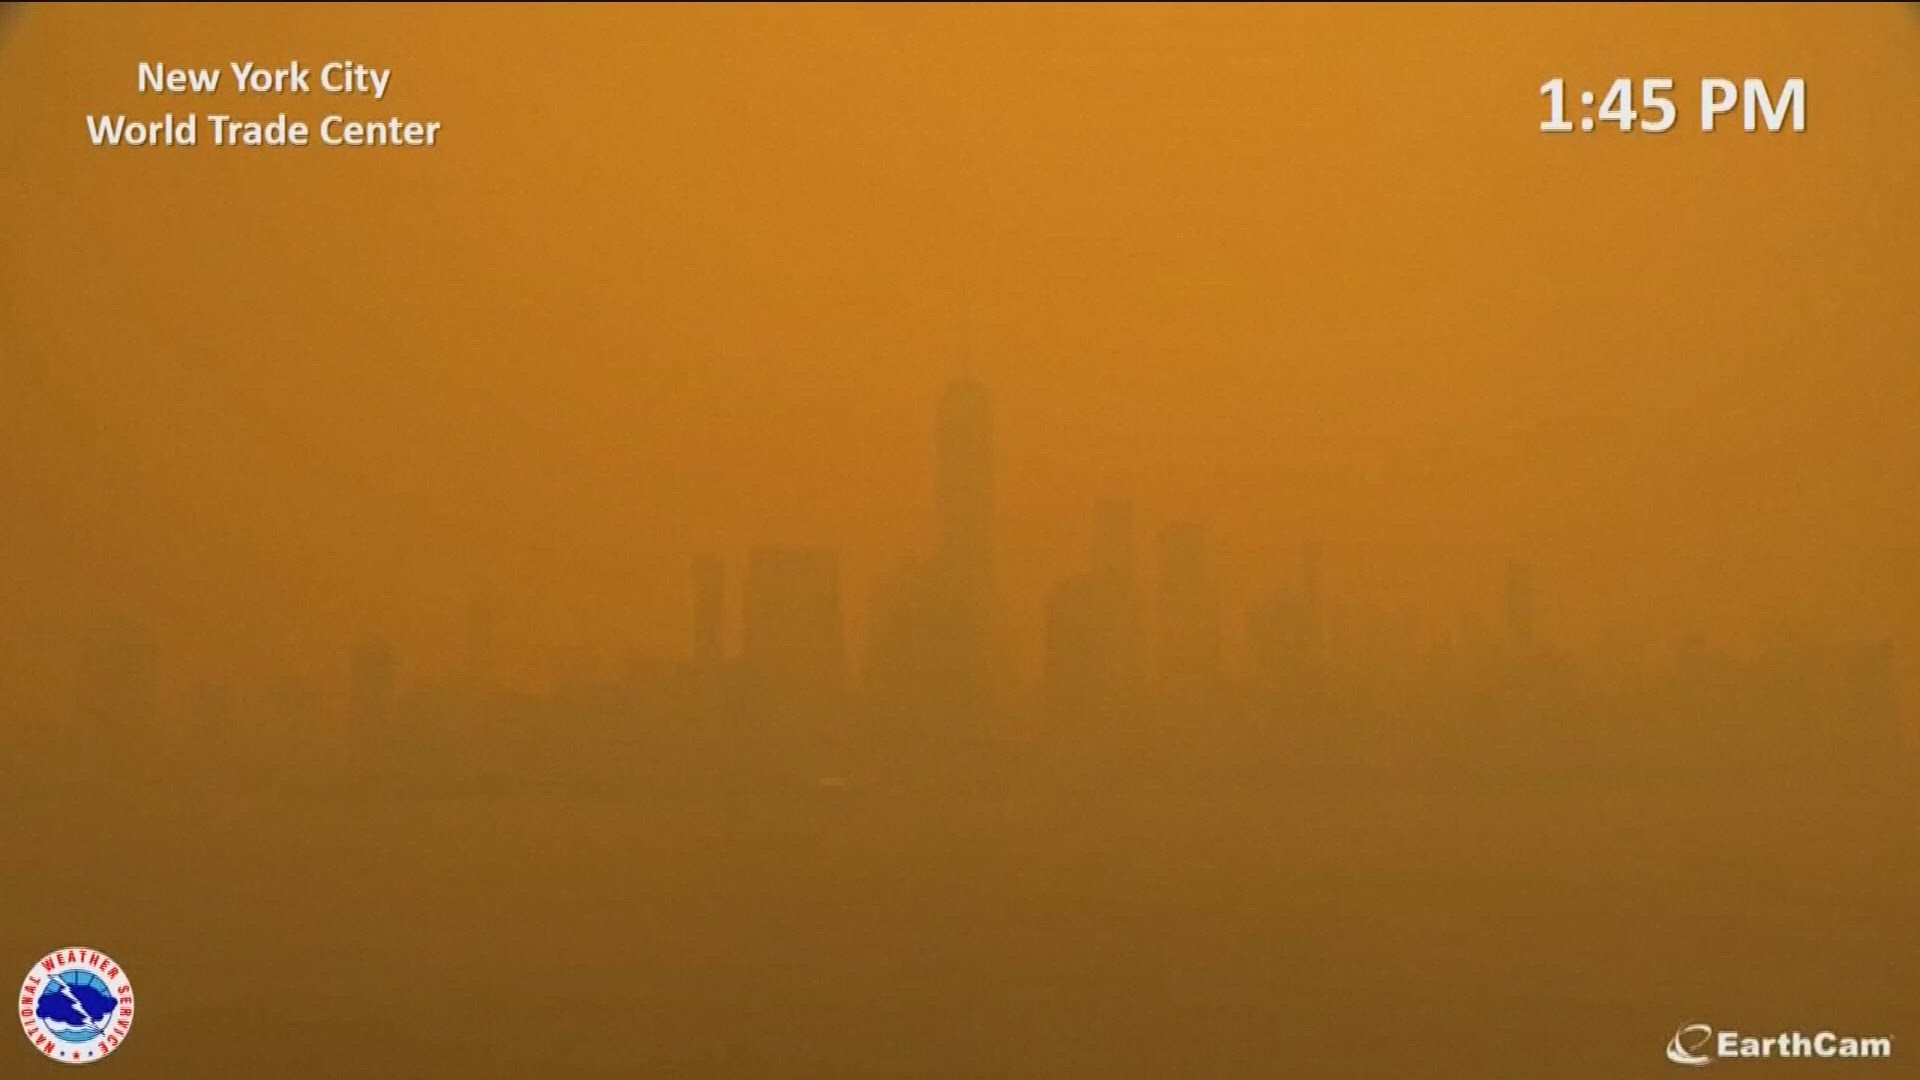 The smoke has given a dystopian quality to some cities, with New York looking like a sepia filter was applied over the city.